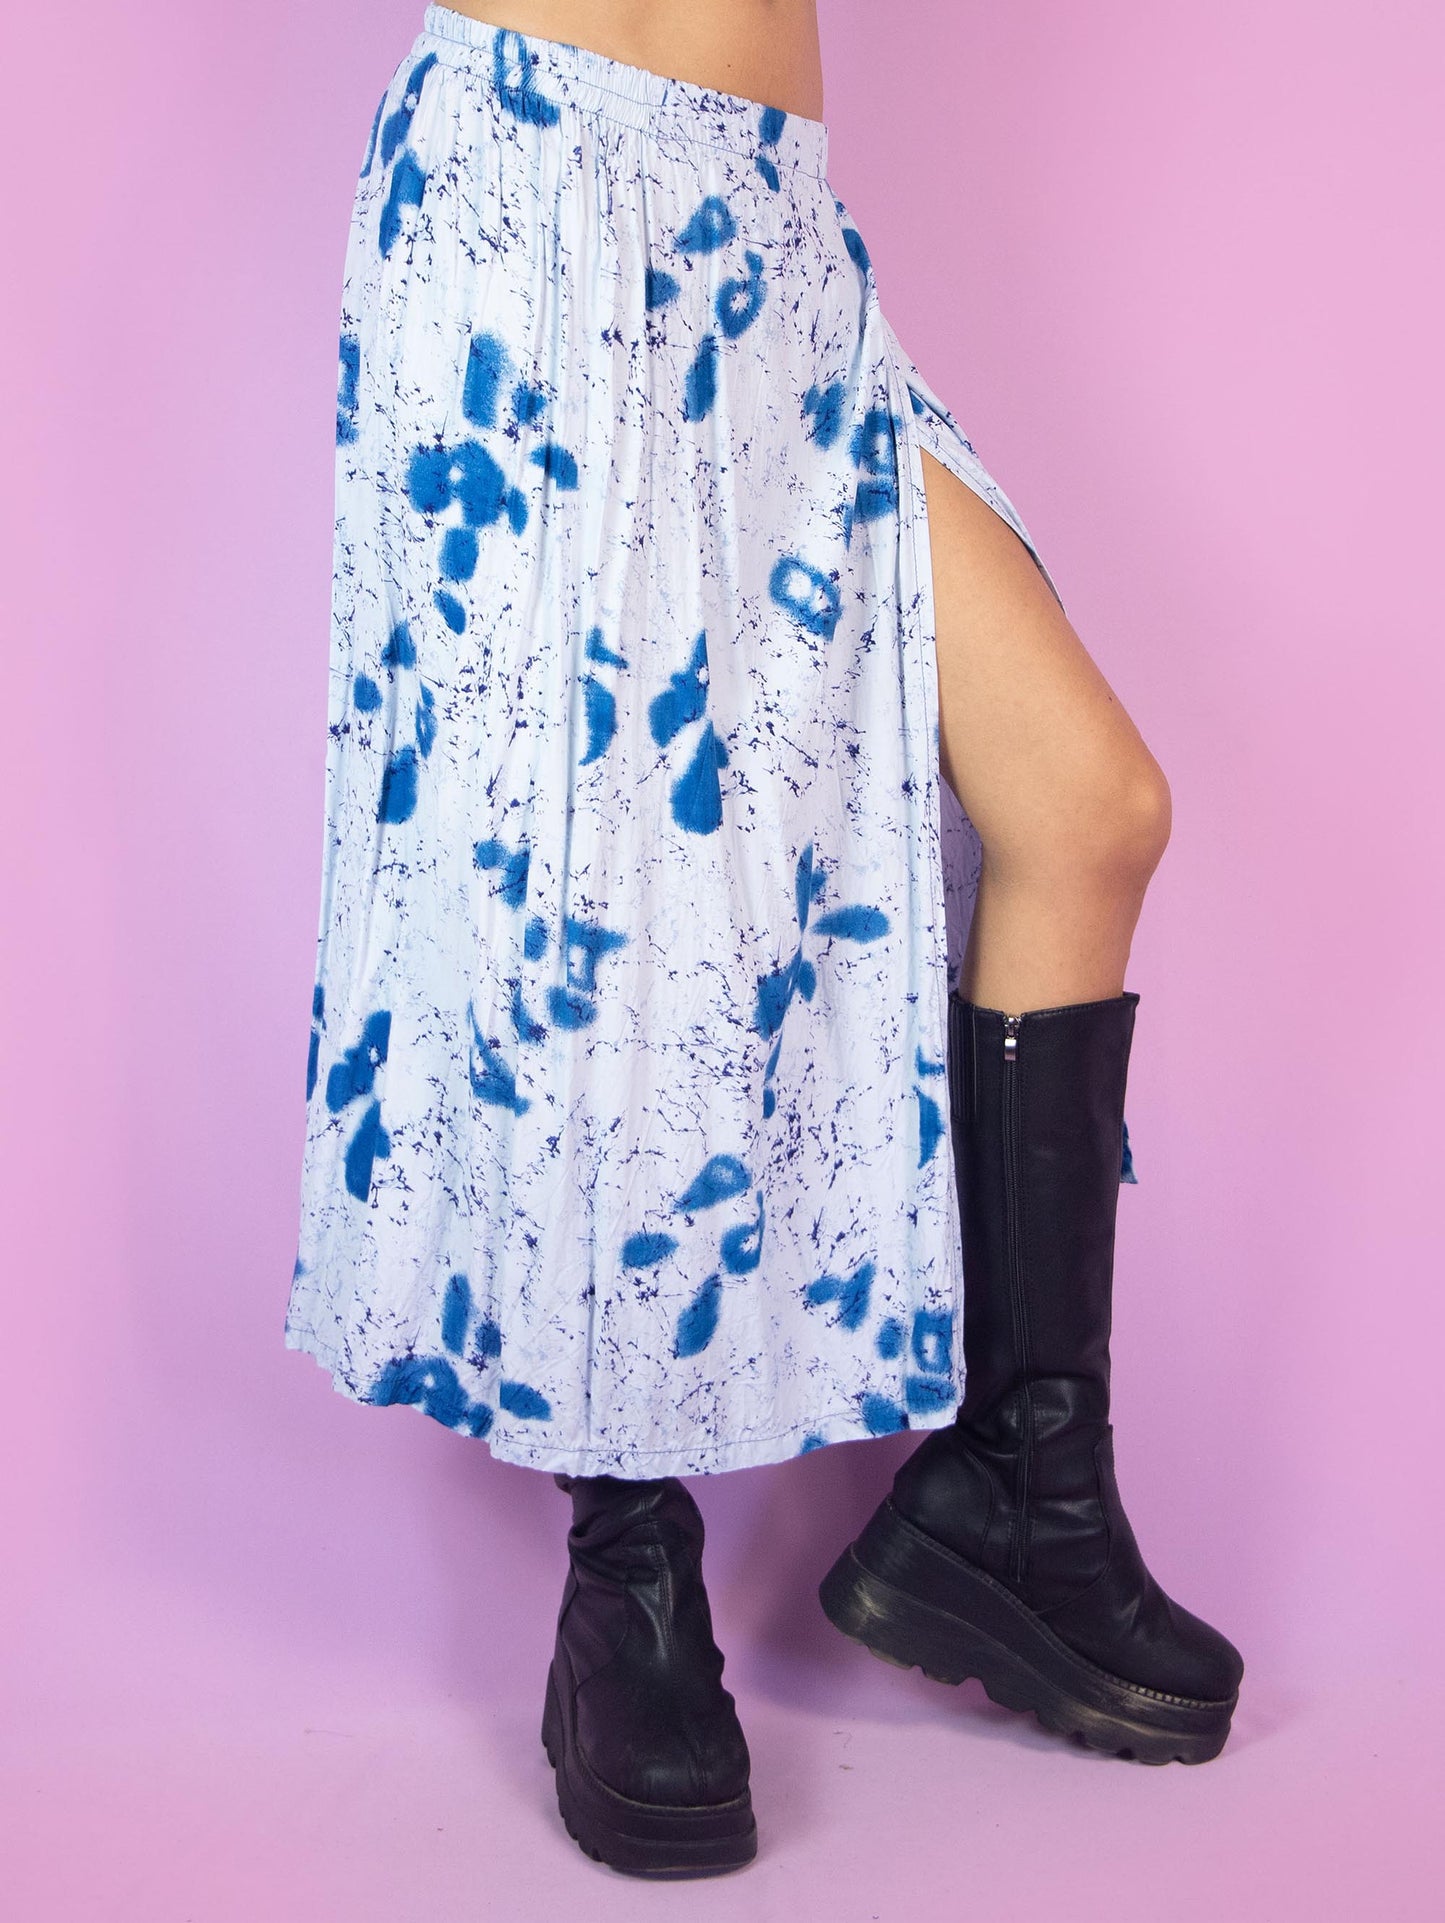 The Vintage 90s Boho Blue Wrap Skirt is a light blue midi skirt with an abstract graphic pattern, featuring a slit and an elastic waistband. Summer beach 1990s flowy cover-up maxi skirt.